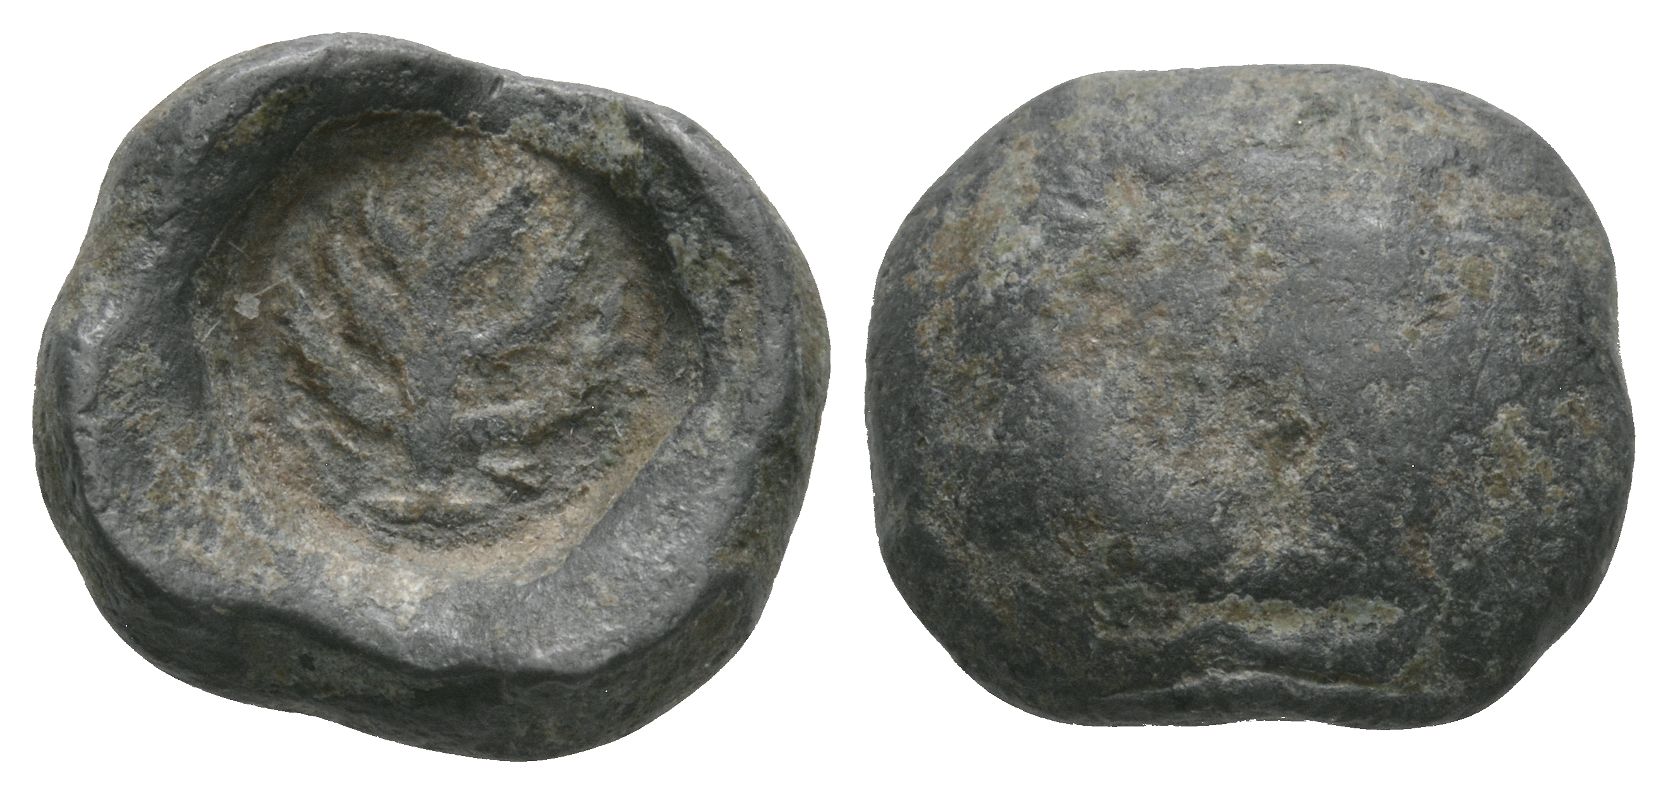 Ancient Byzantine Seal - Lead Uniface Seal